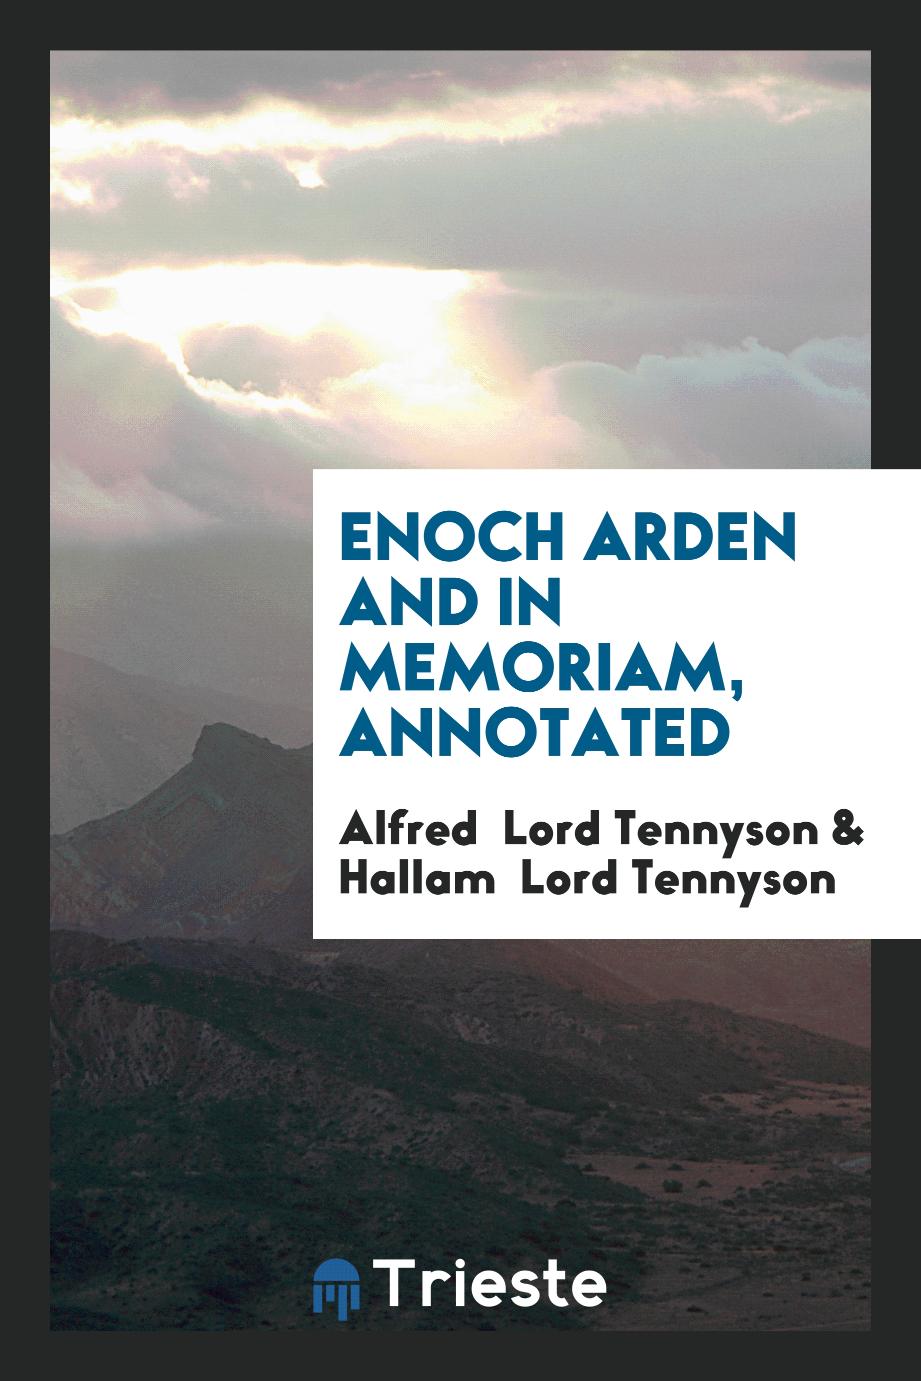 Enoch arden and in memoriam, annotated